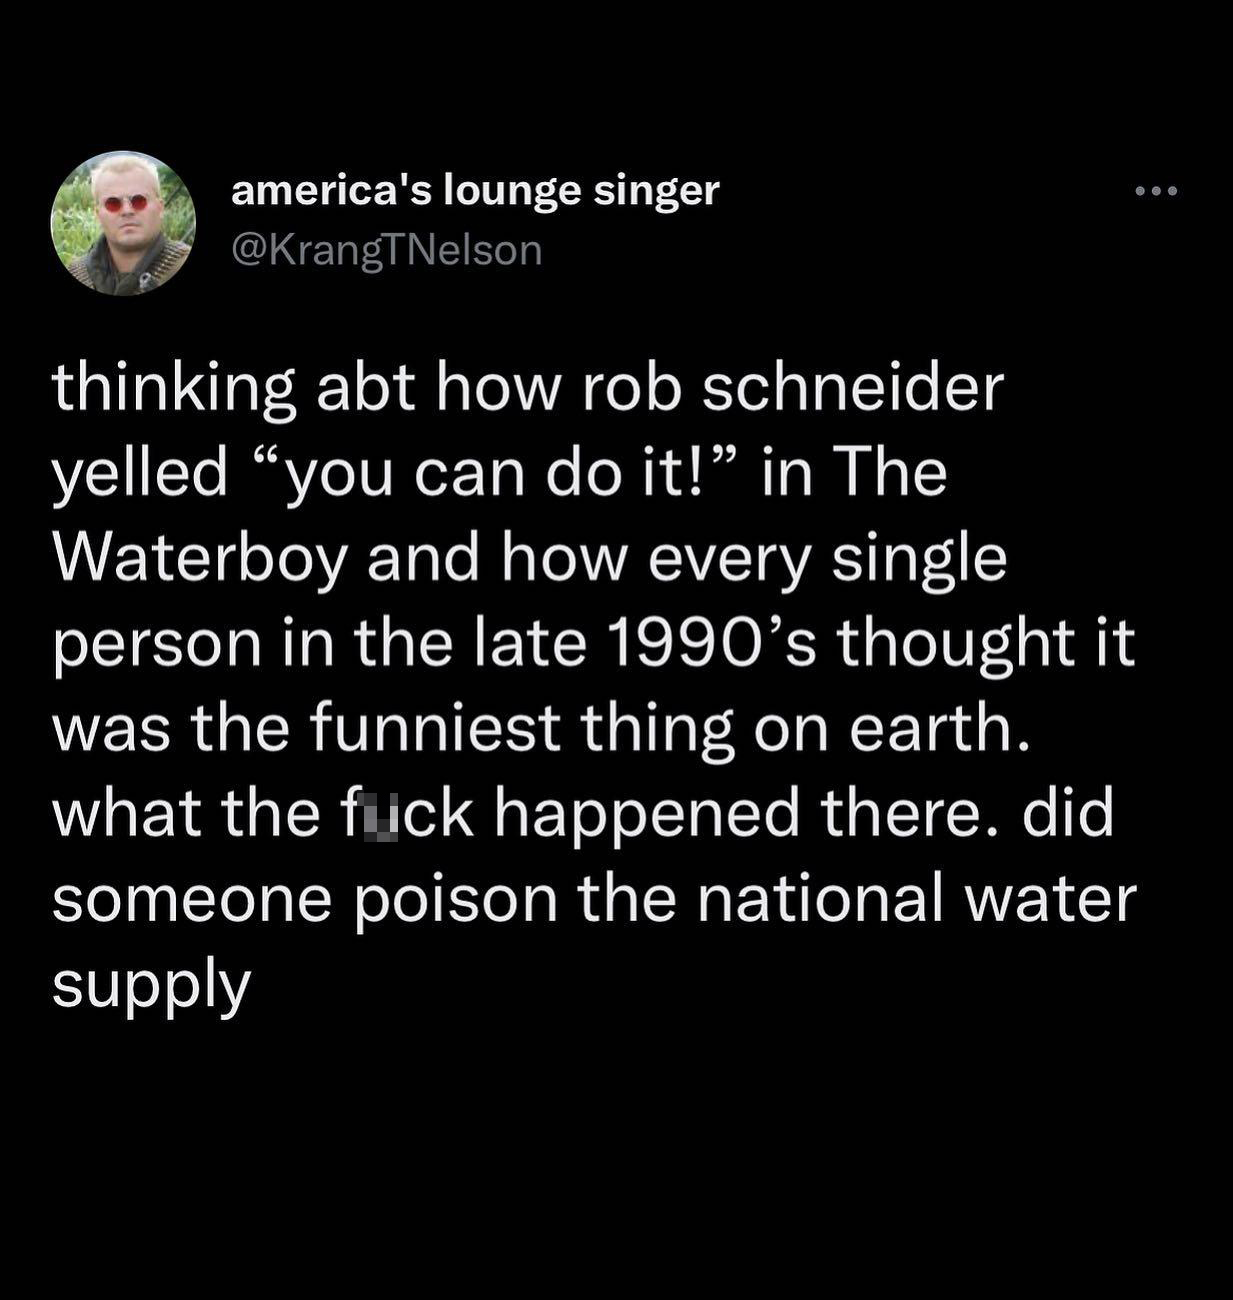 funny tweets - lebron don t talk about my squad - america's lounge singer thinking abt how rob schneider yelled "you can do it!" in The Waterboy and how every single person in the late 1990's thought it was the funniest thing on earth. what the fuck happe